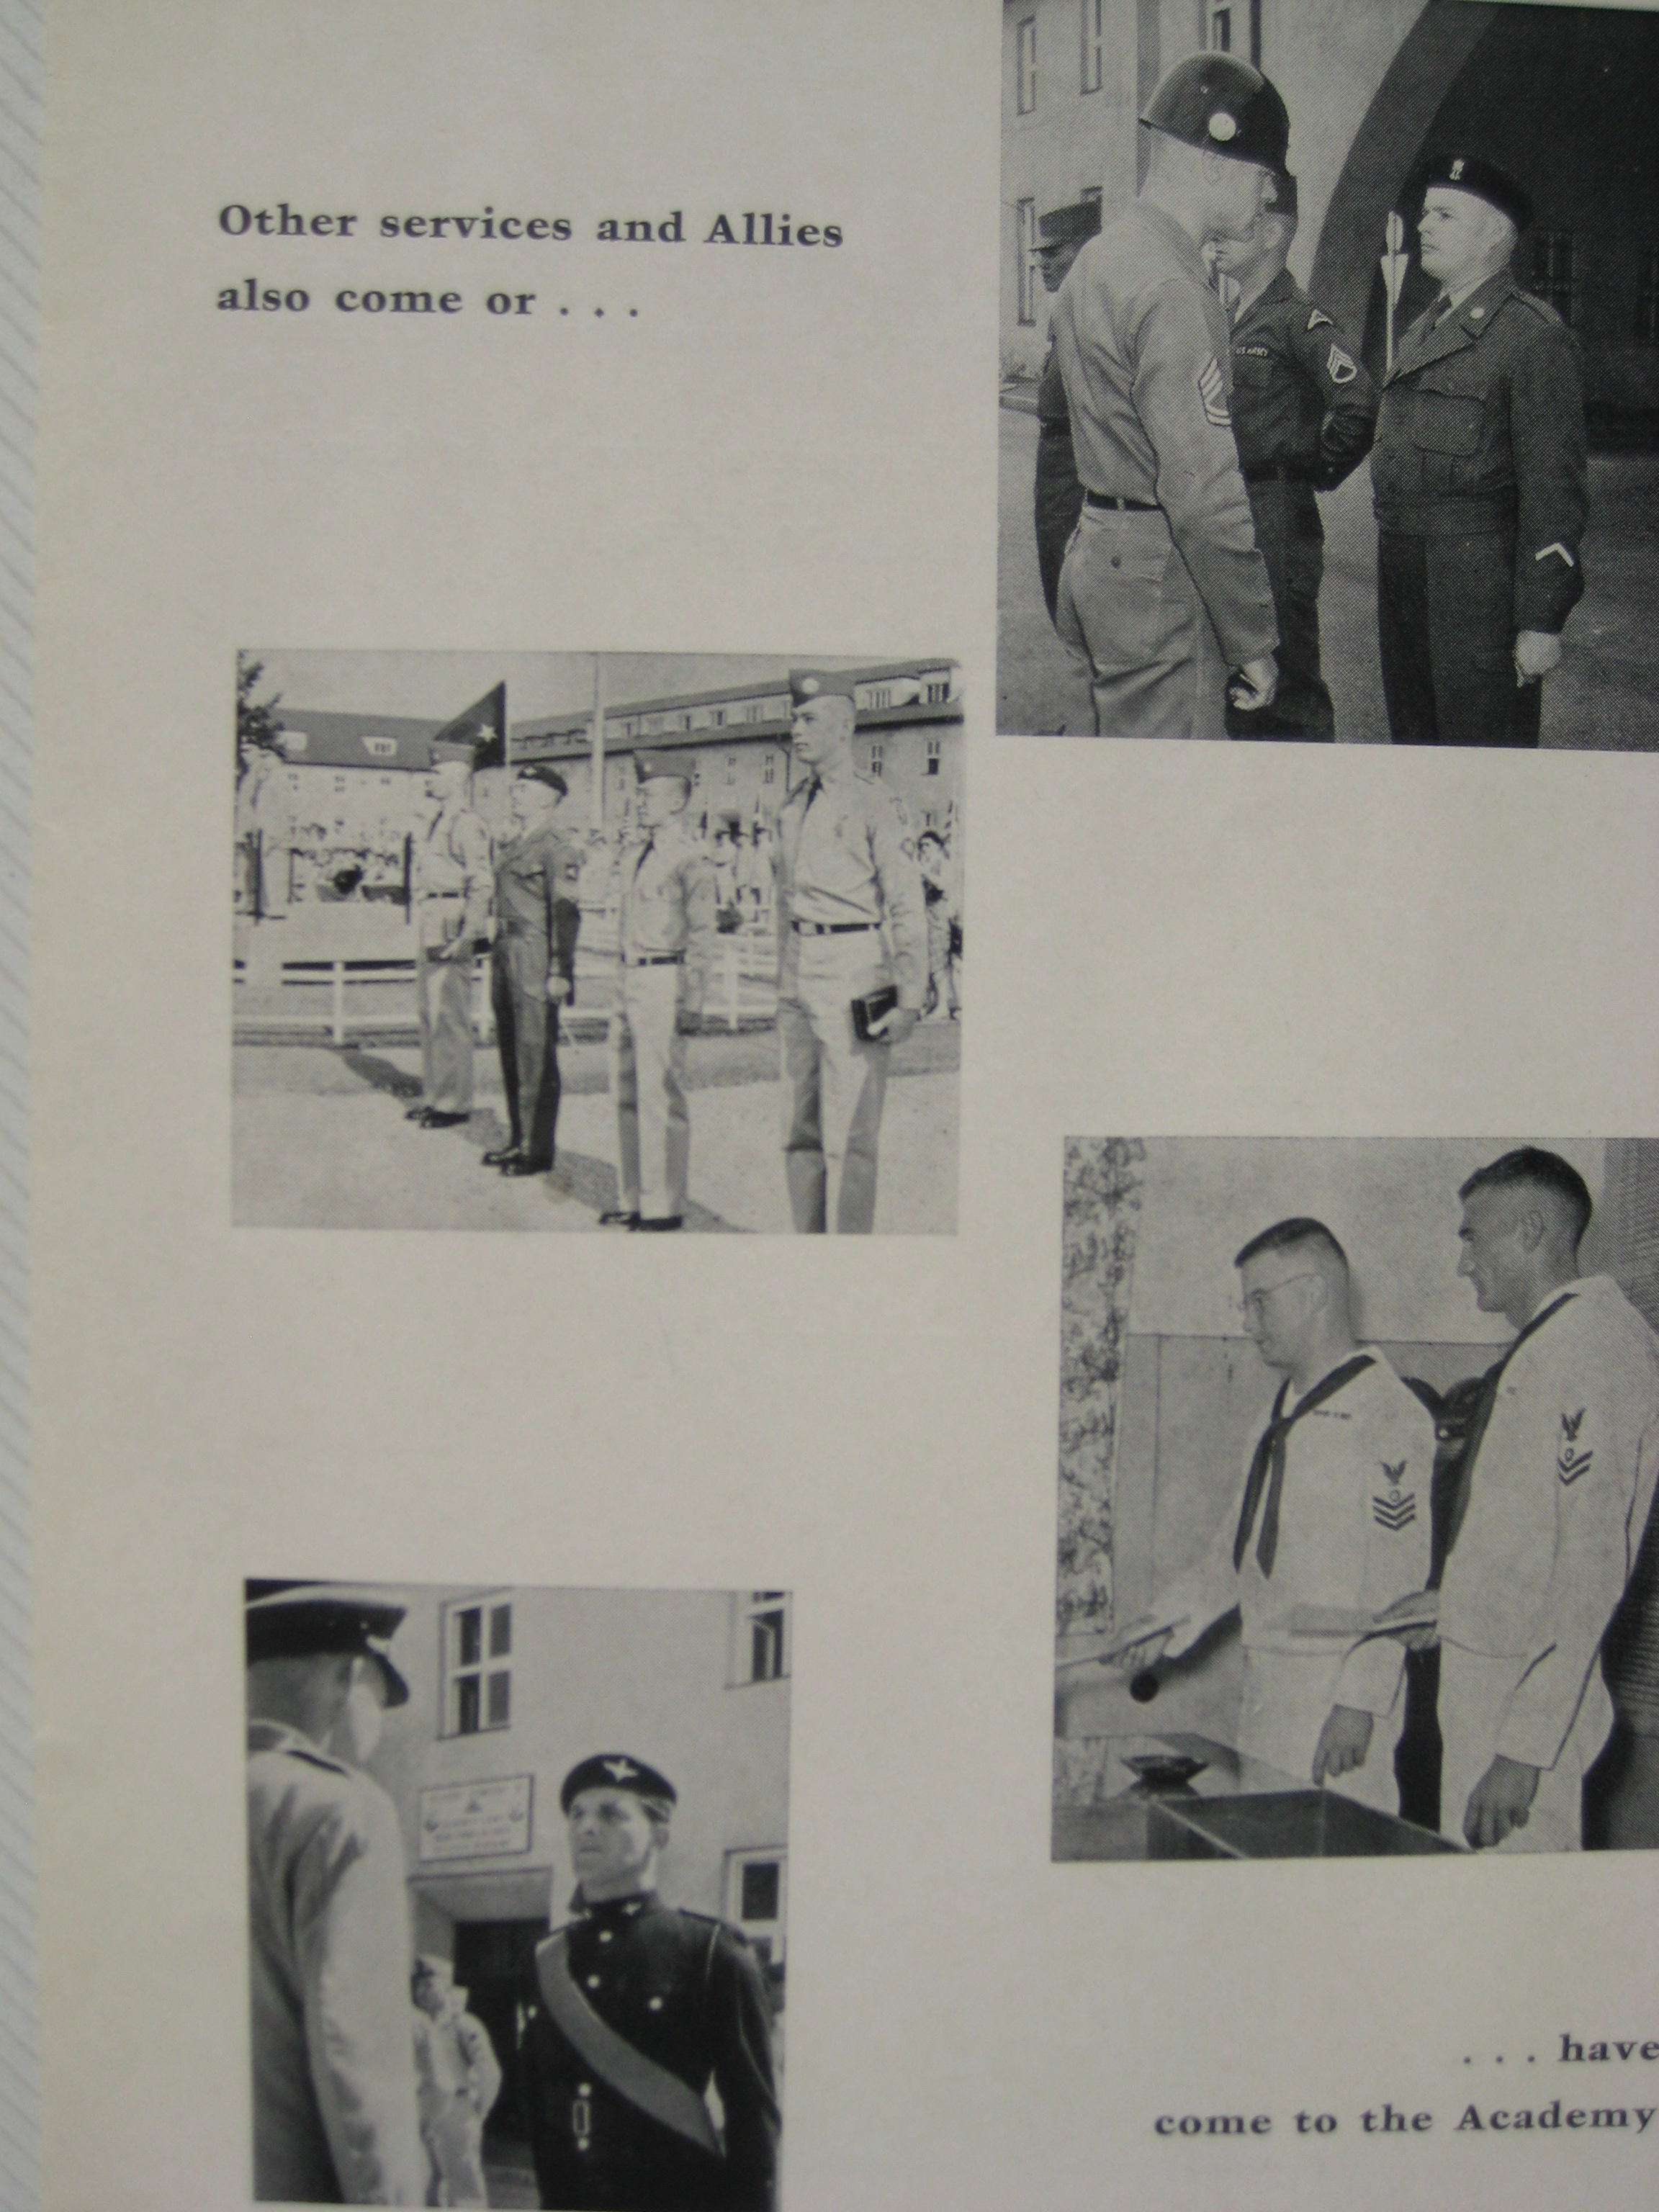 Specialist Duffy (left center photo, forefront) receiving the Honor graduate and Leadership award from the 7th Army NCO Academy, 1962  Spot promotion to Sergeant and recommended for Officer Schooling